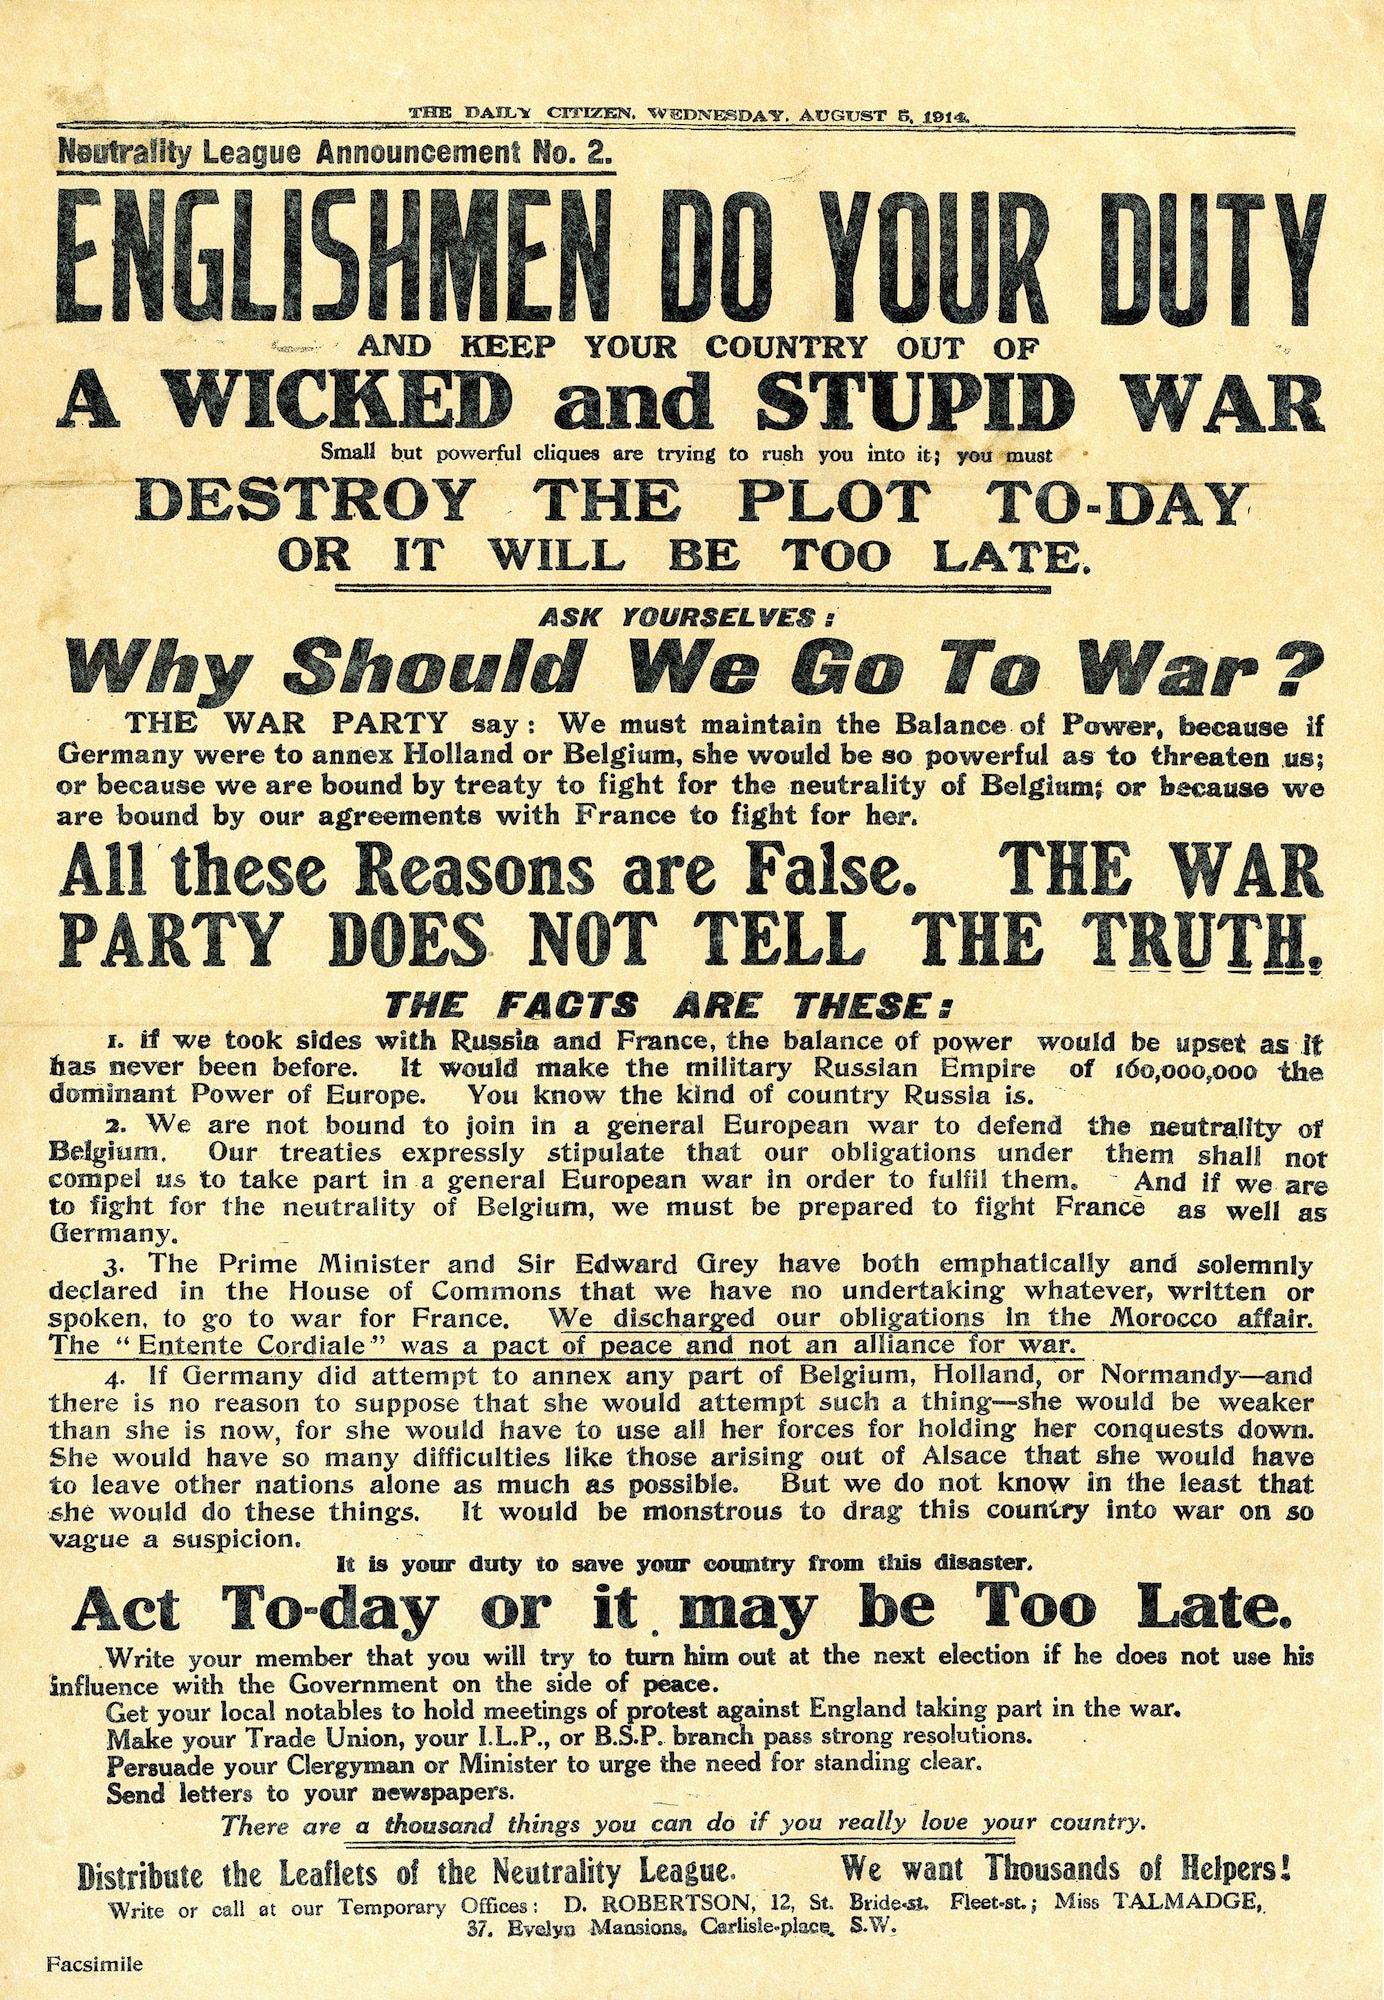 Britain's decision to declare war on Germany on Aug. 4, 1914, was polarizing. The Neutrality League, founded by Sir Norman Angell, appealed to the masses though newspaper advertisements. This ad, published on Aug. 5, 1914, in The Daily Citizen urged Englishmen to reconsider the arguments for going to war. Though the Neutrality League's campaign was initially successful, raising over £2,300 for their cause (worth about $280,000 in 2014), the League had run out of steam -- and support -- by 1915. (U.S. Air Force photo)